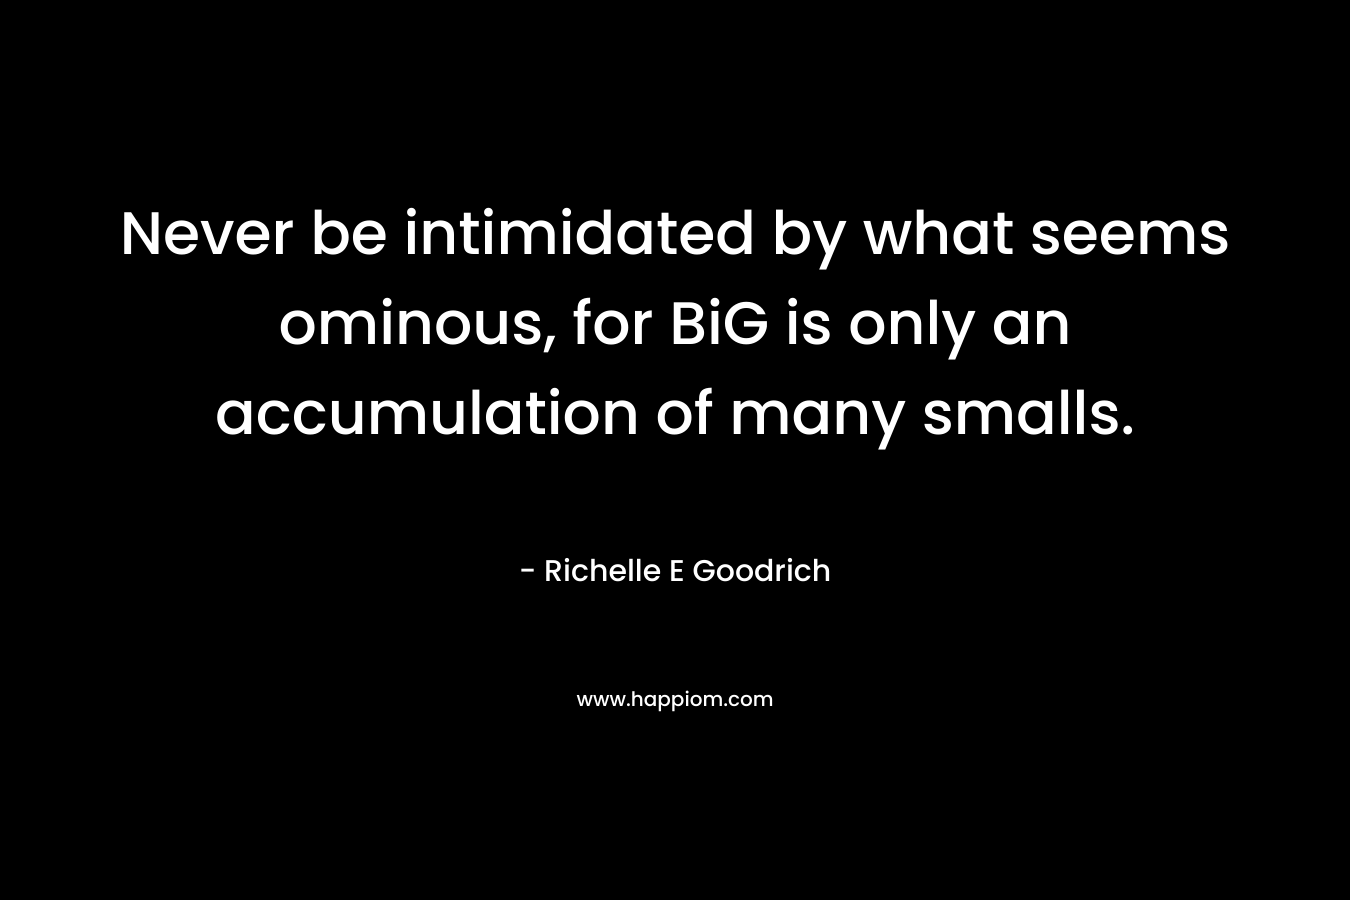 Never be intimidated by what seems ominous, for BiG is only an accumulation of many smalls. – Richelle E Goodrich